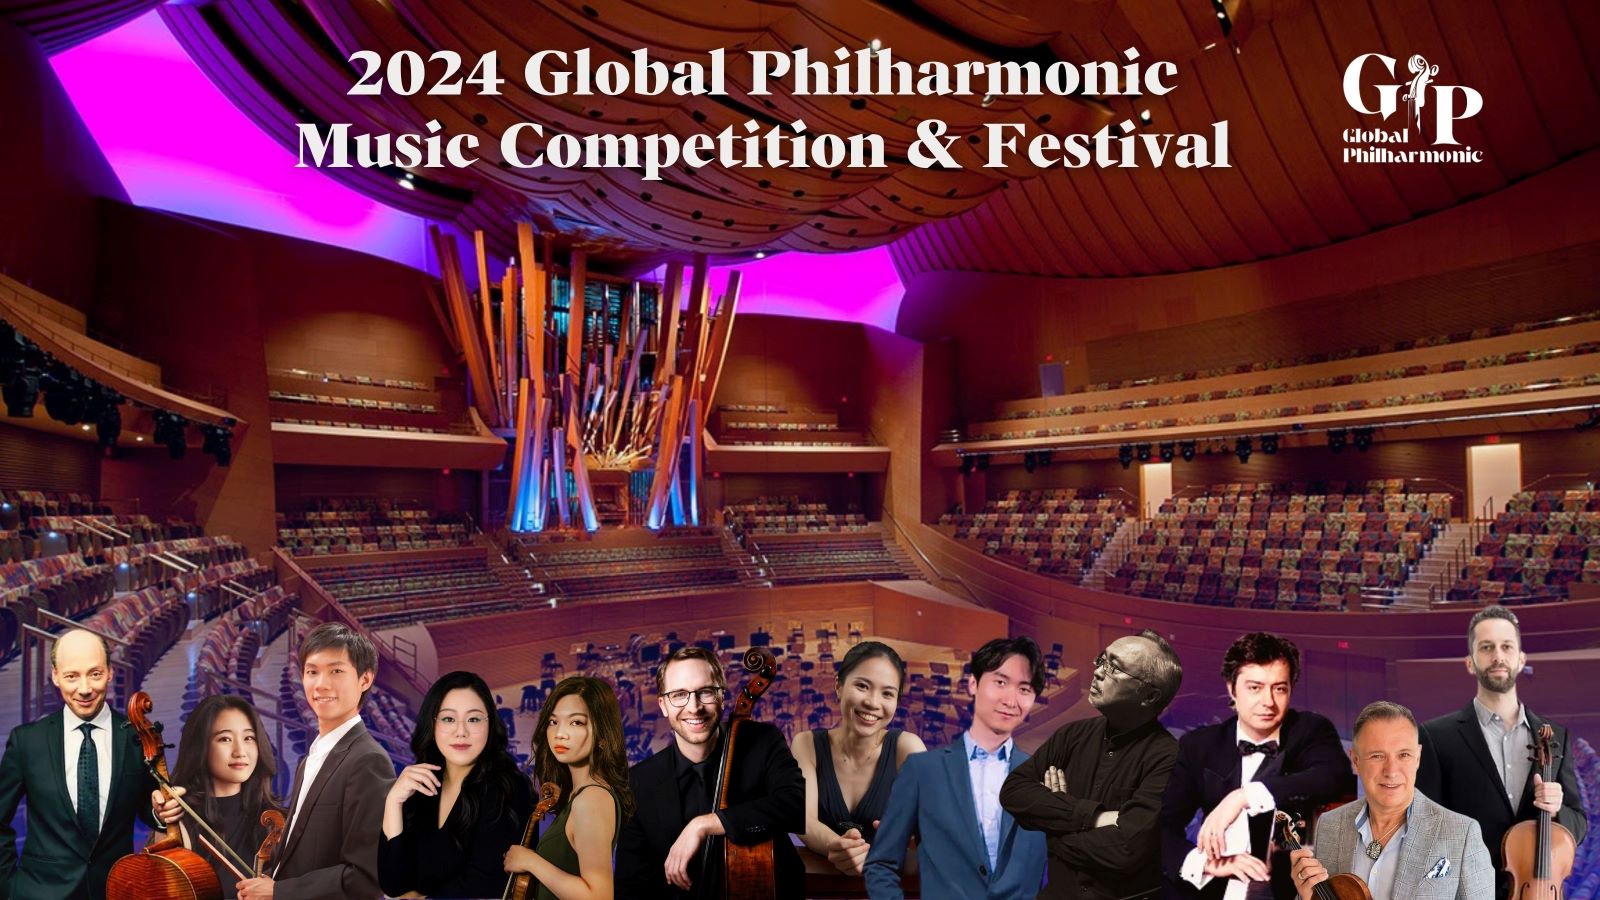 The Royal Foundation of Music and Arts Presents: The Global Philharmonic Music Competition